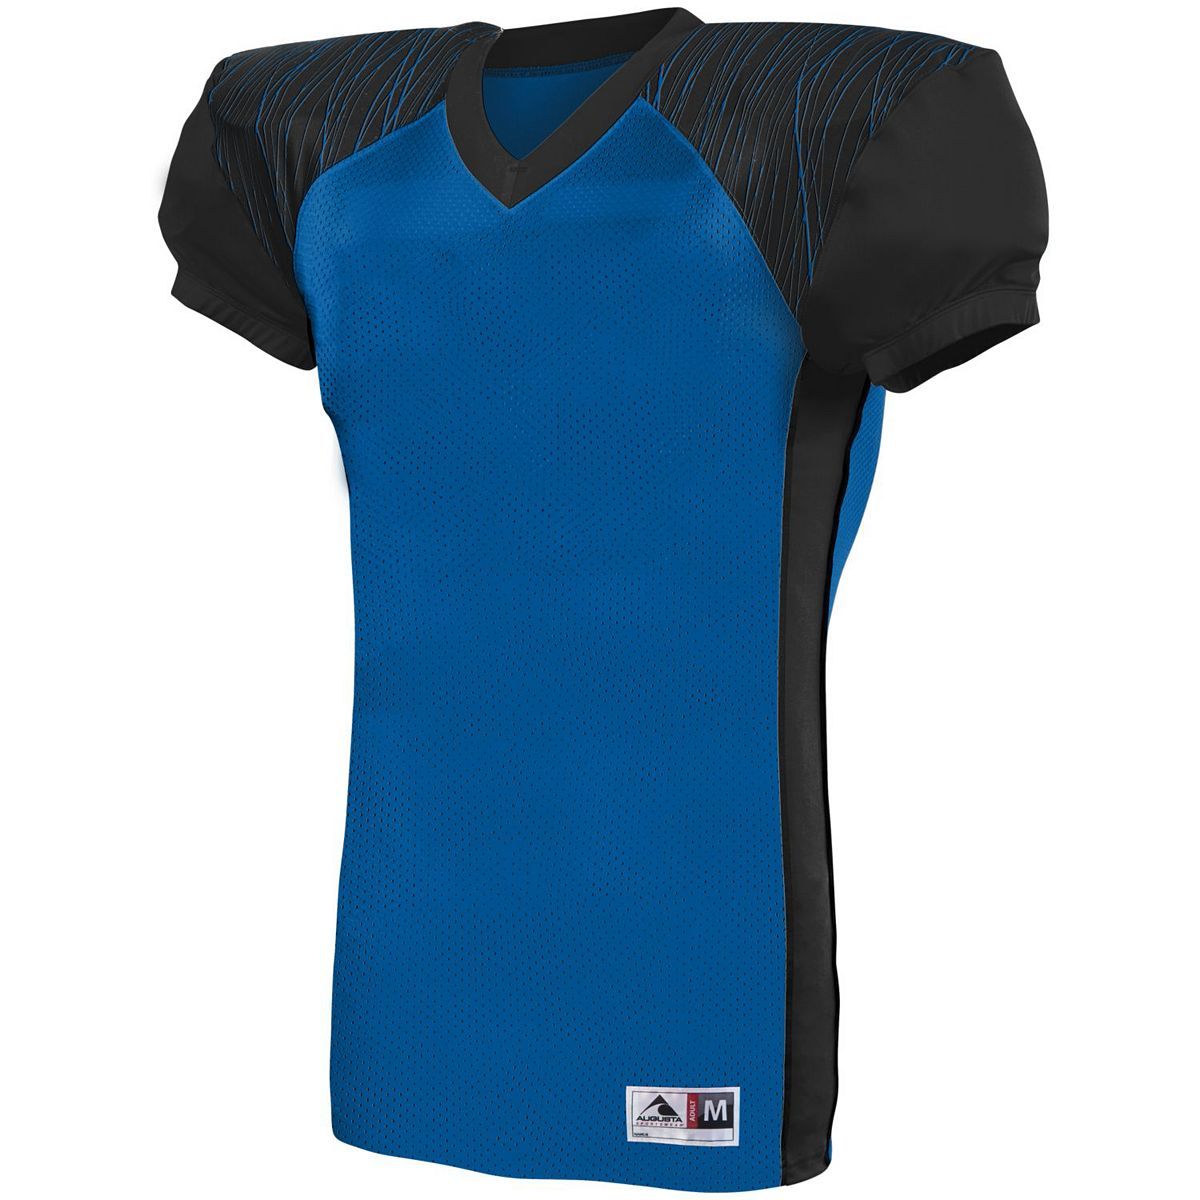 Augusta Sportswear Zone Play Jersey in Royal/Black/Royal Print  -Part of the Adult, Adult-Jersey, Augusta-Products, Football, Shirts, All-Sports, All-Sports-1 product lines at KanaleyCreations.com